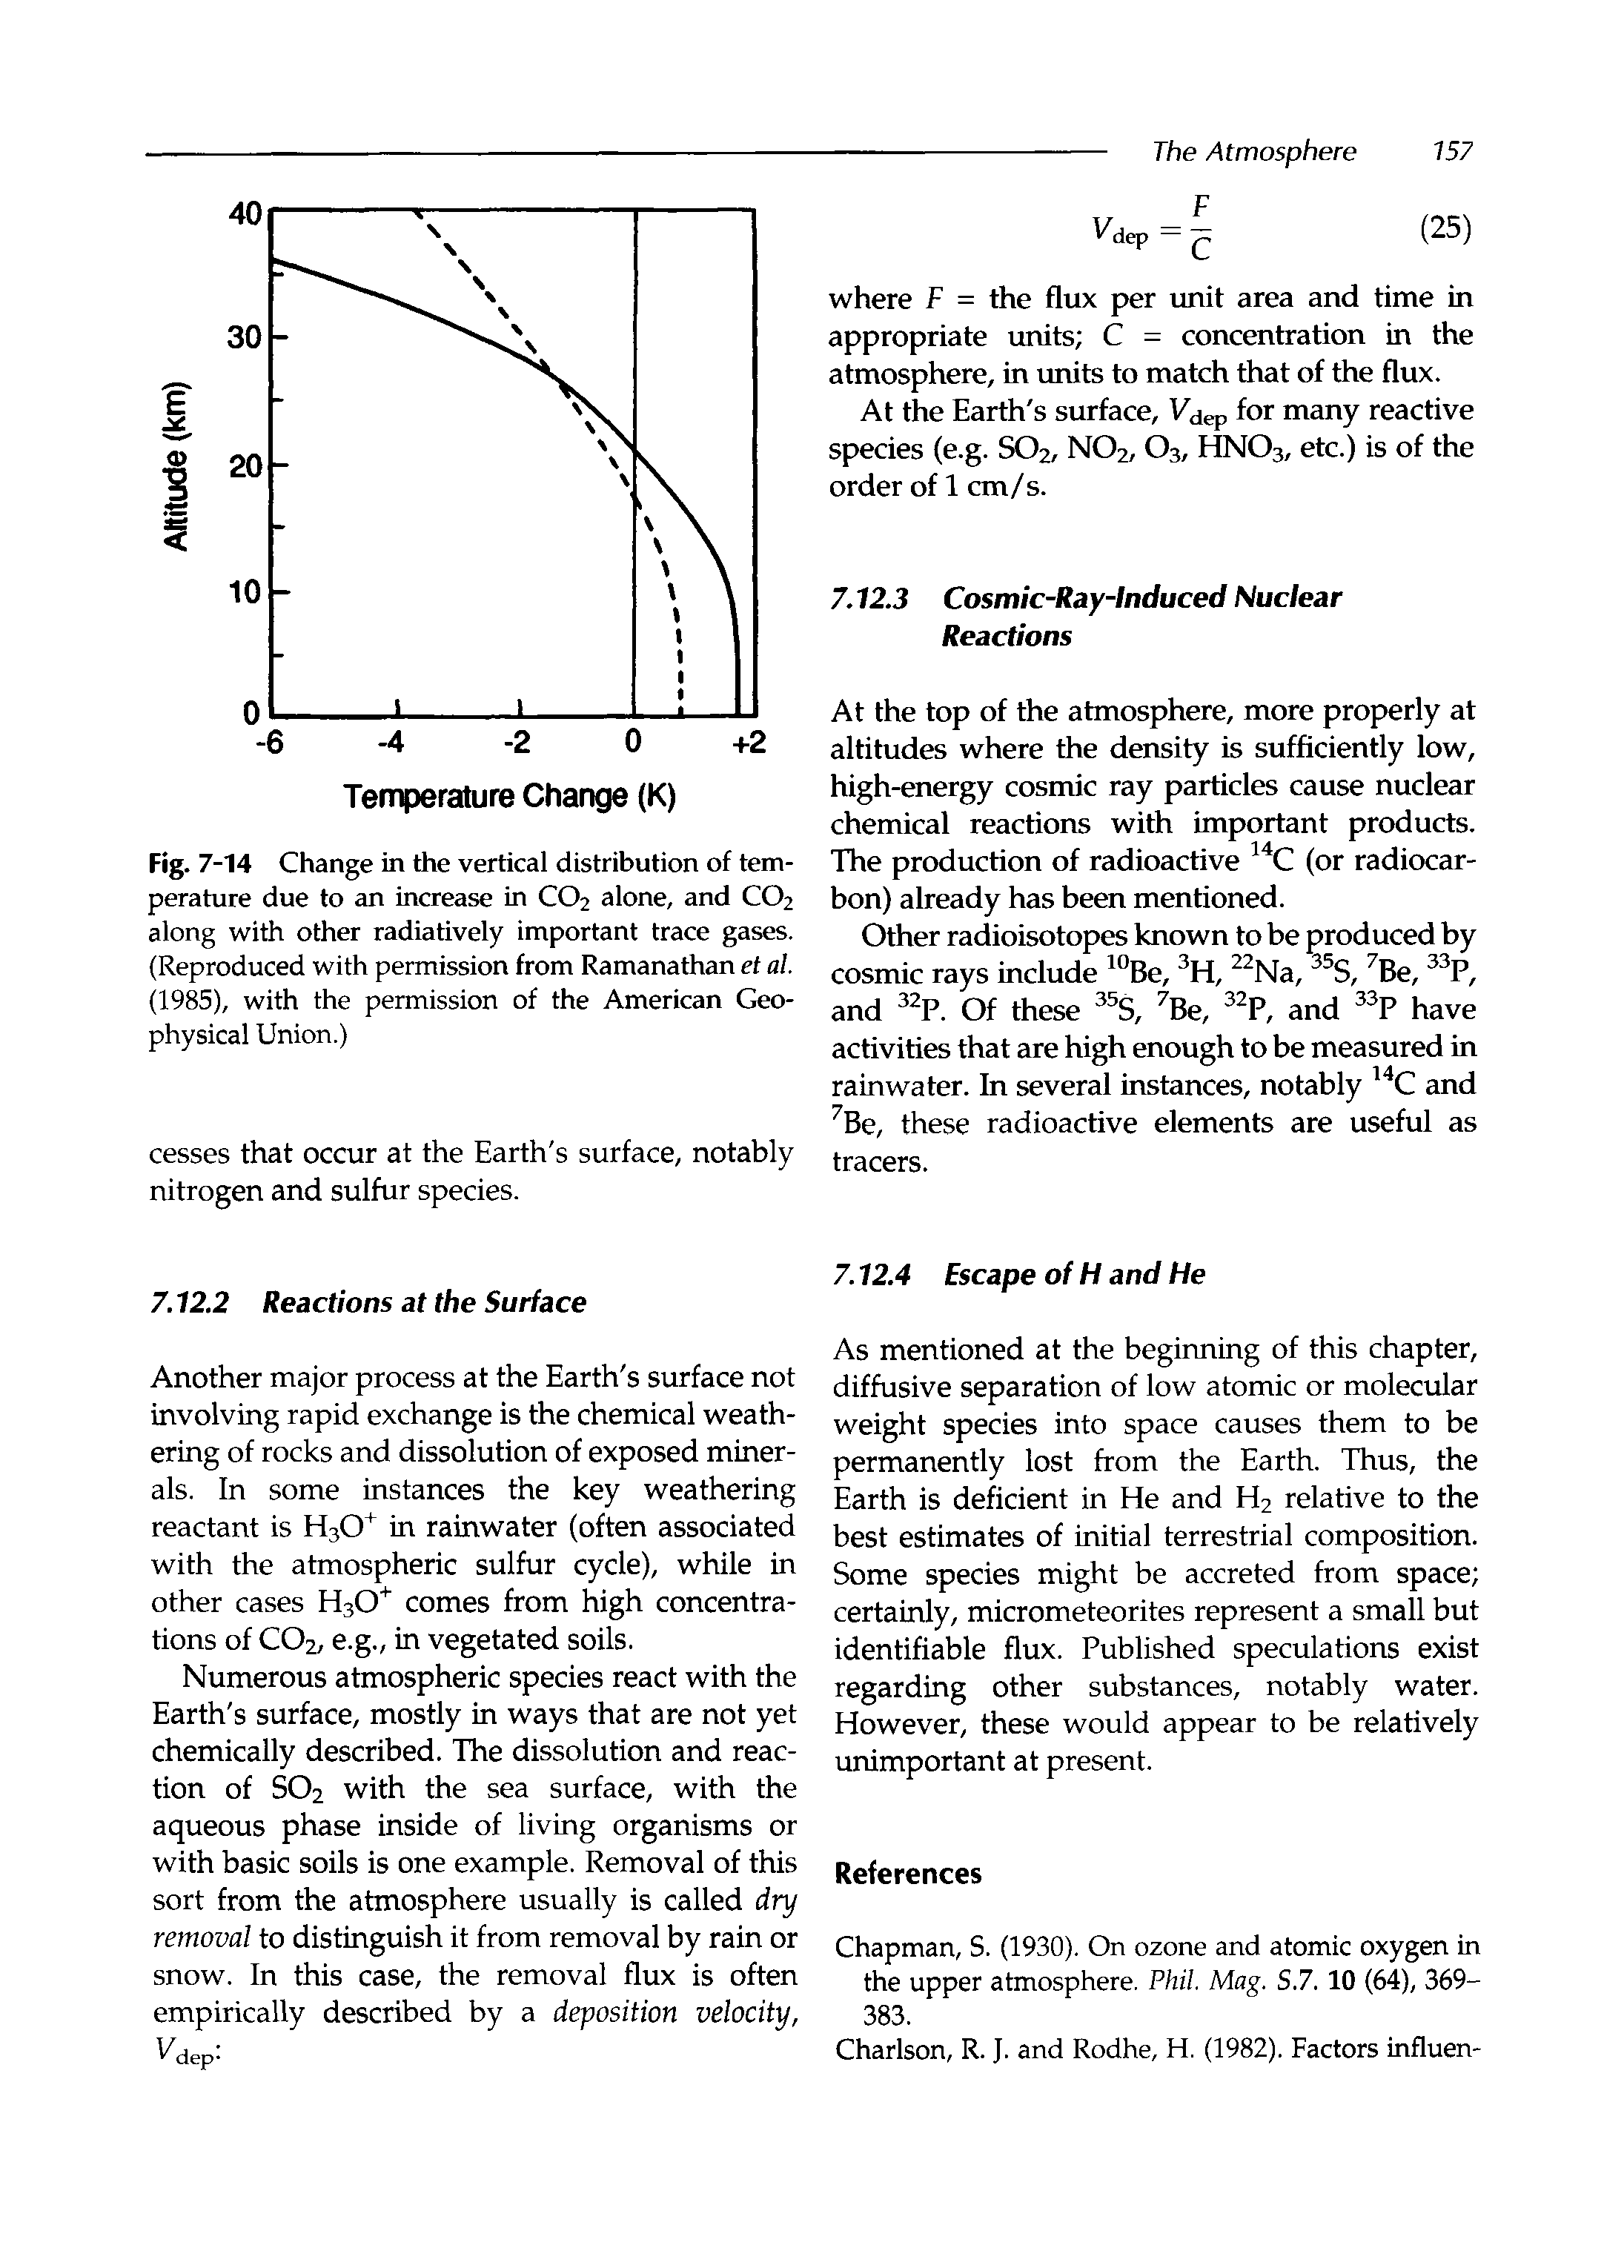 Fig. 7-14 Change in the vertical distribution of temperature due to an increase in CO2 alone, and CO2 along with other radiatively important trace gases. (Reproduced with permission from Ramanathan et al. (1985), with the permission of the American Geophysical Union.)...